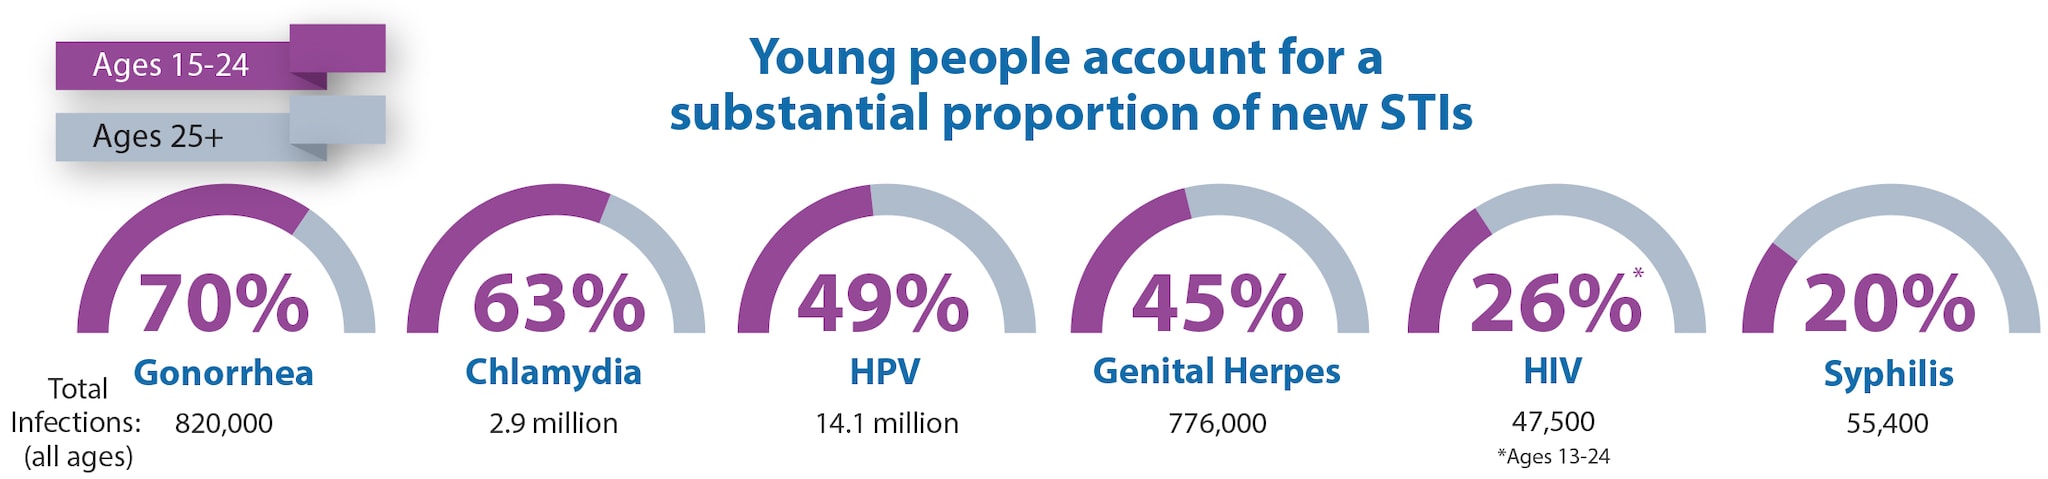 Young people account for a substantial proportion of new STIs. Americans ages 15 to 24 account for 70% of the 820,000 gonorrhea infections among all ages; 63% of the 2.9 million chlamydia infections among all ages; 49% of the 14.1 million HPV infections among all ages; 45% of the 776,000 genital herpes infections among all ages; and 20% of the 55,400 syphilis infections among all ages. Finally, Americans ages 13 to 24 account for 26% of the 47,500 HIV infections among all ages.